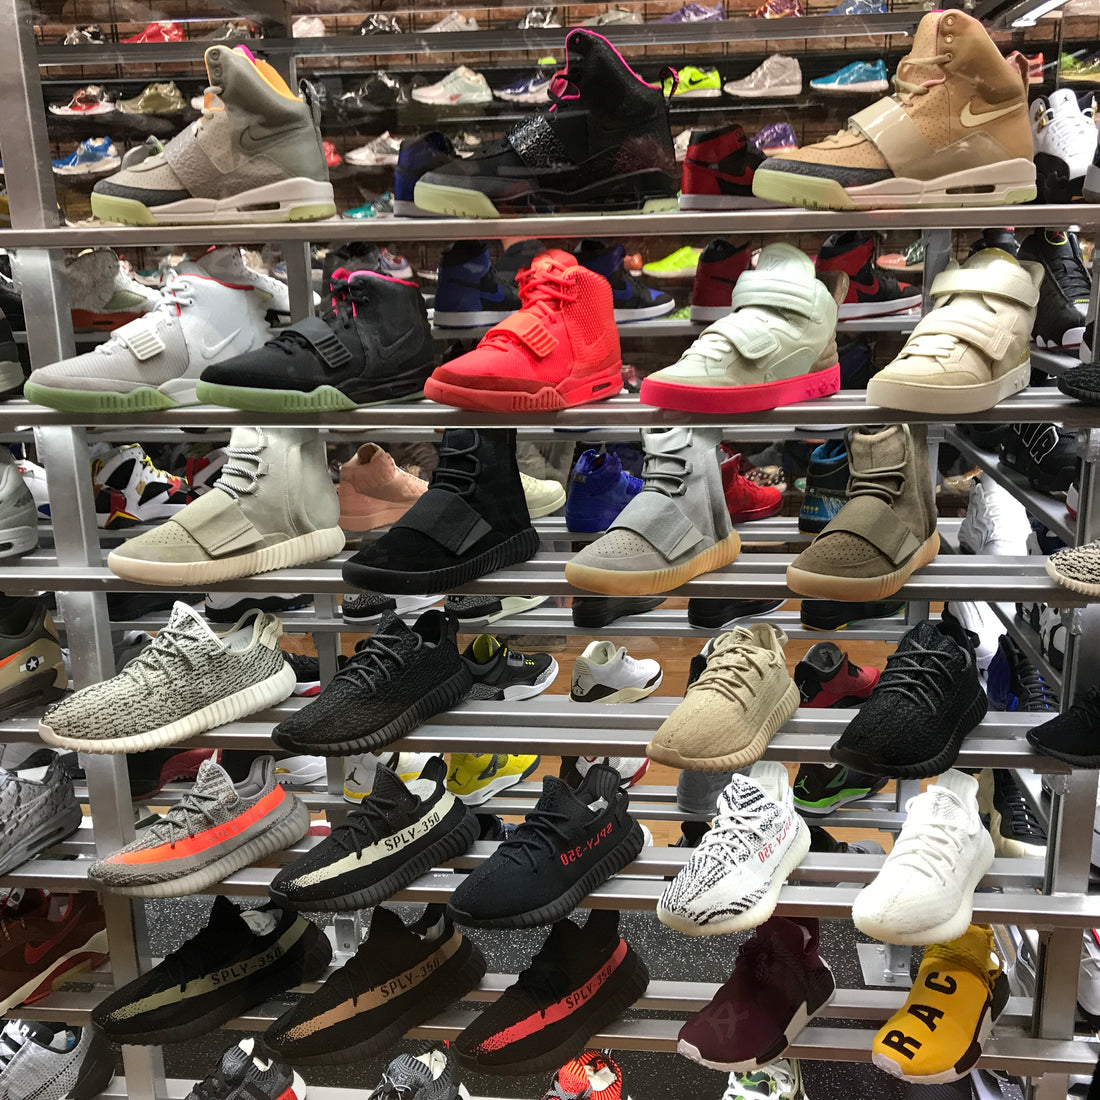 What Are The Best Sneaker Stores In NYC, New York?